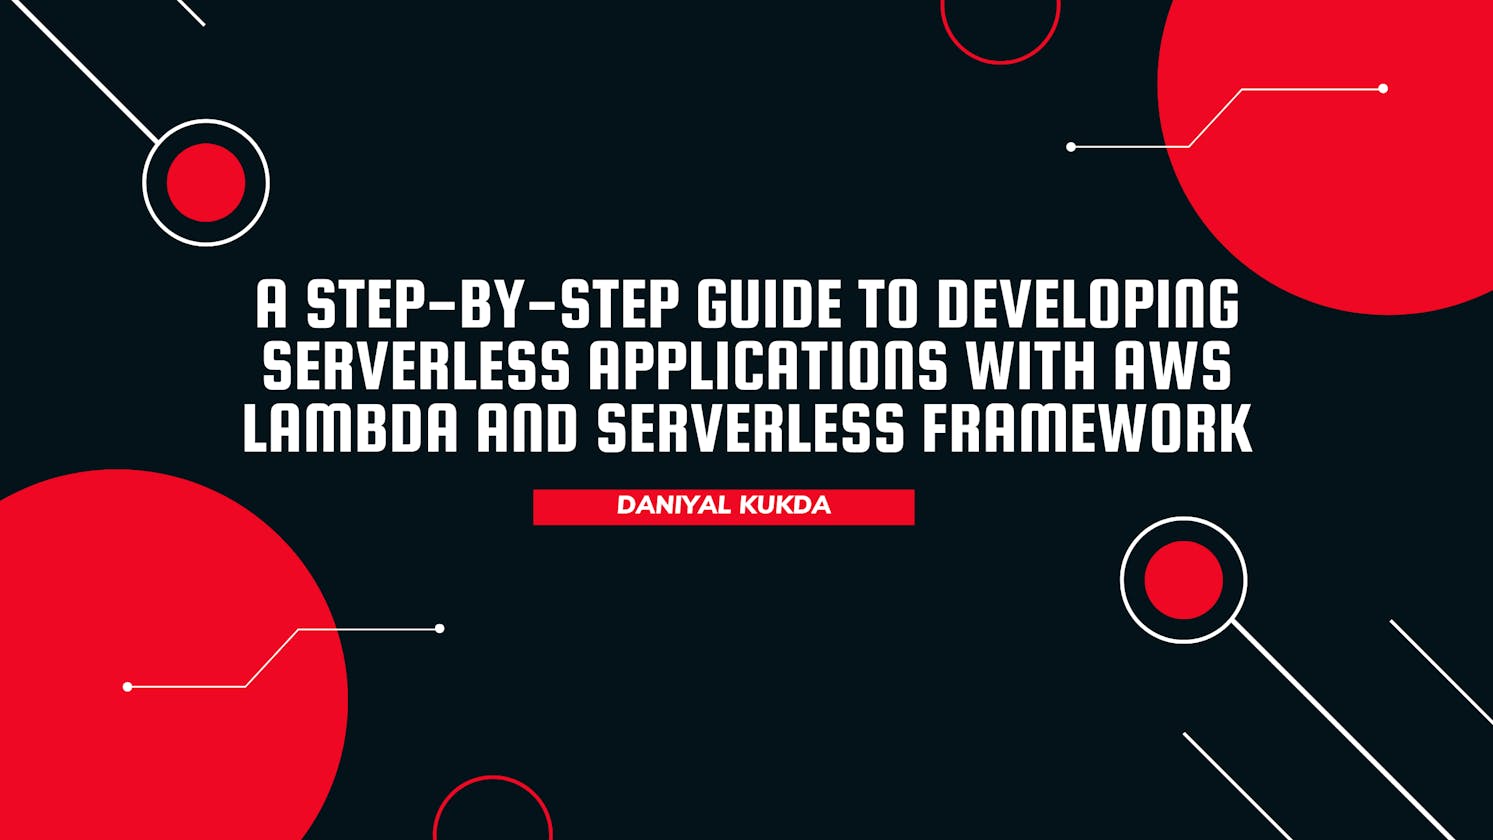 A Step-by-Step Guide to Developing Serverless Applications with AWS Lambda and Serverless Framework